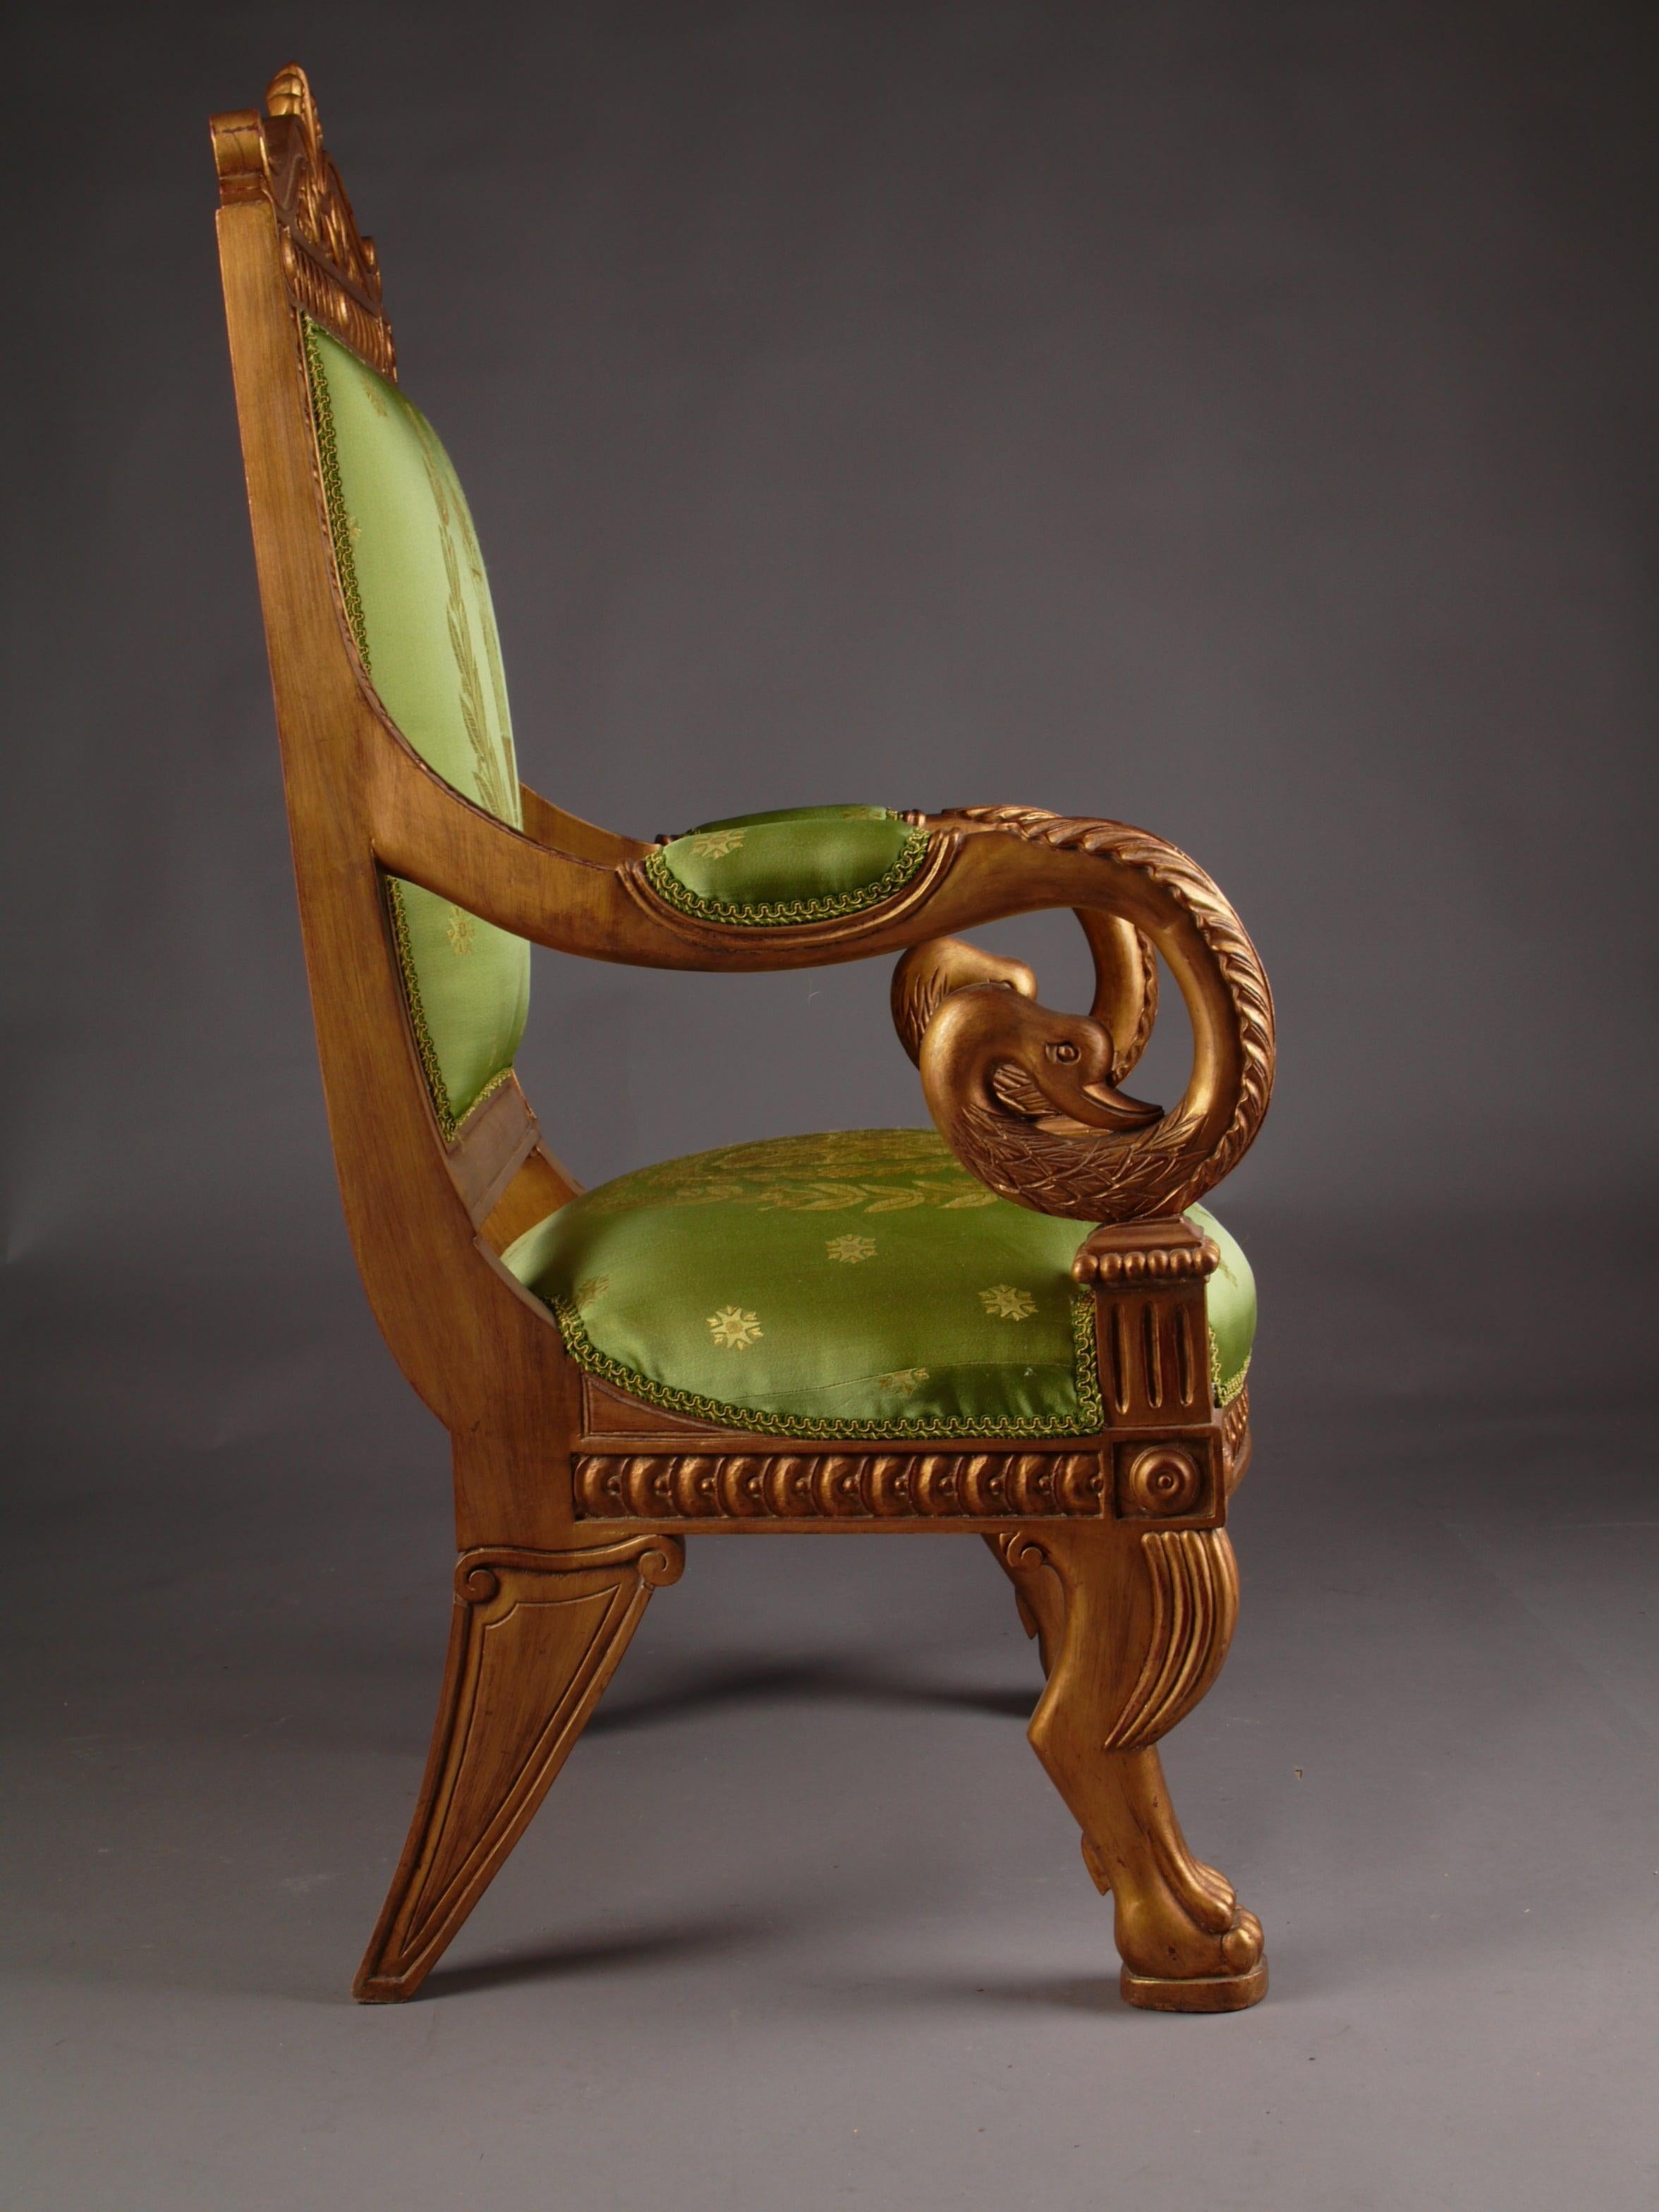 20th Century Napoleonic Swan Chair in the Empire Style Beechwood Poliment Gilded For Sale 4